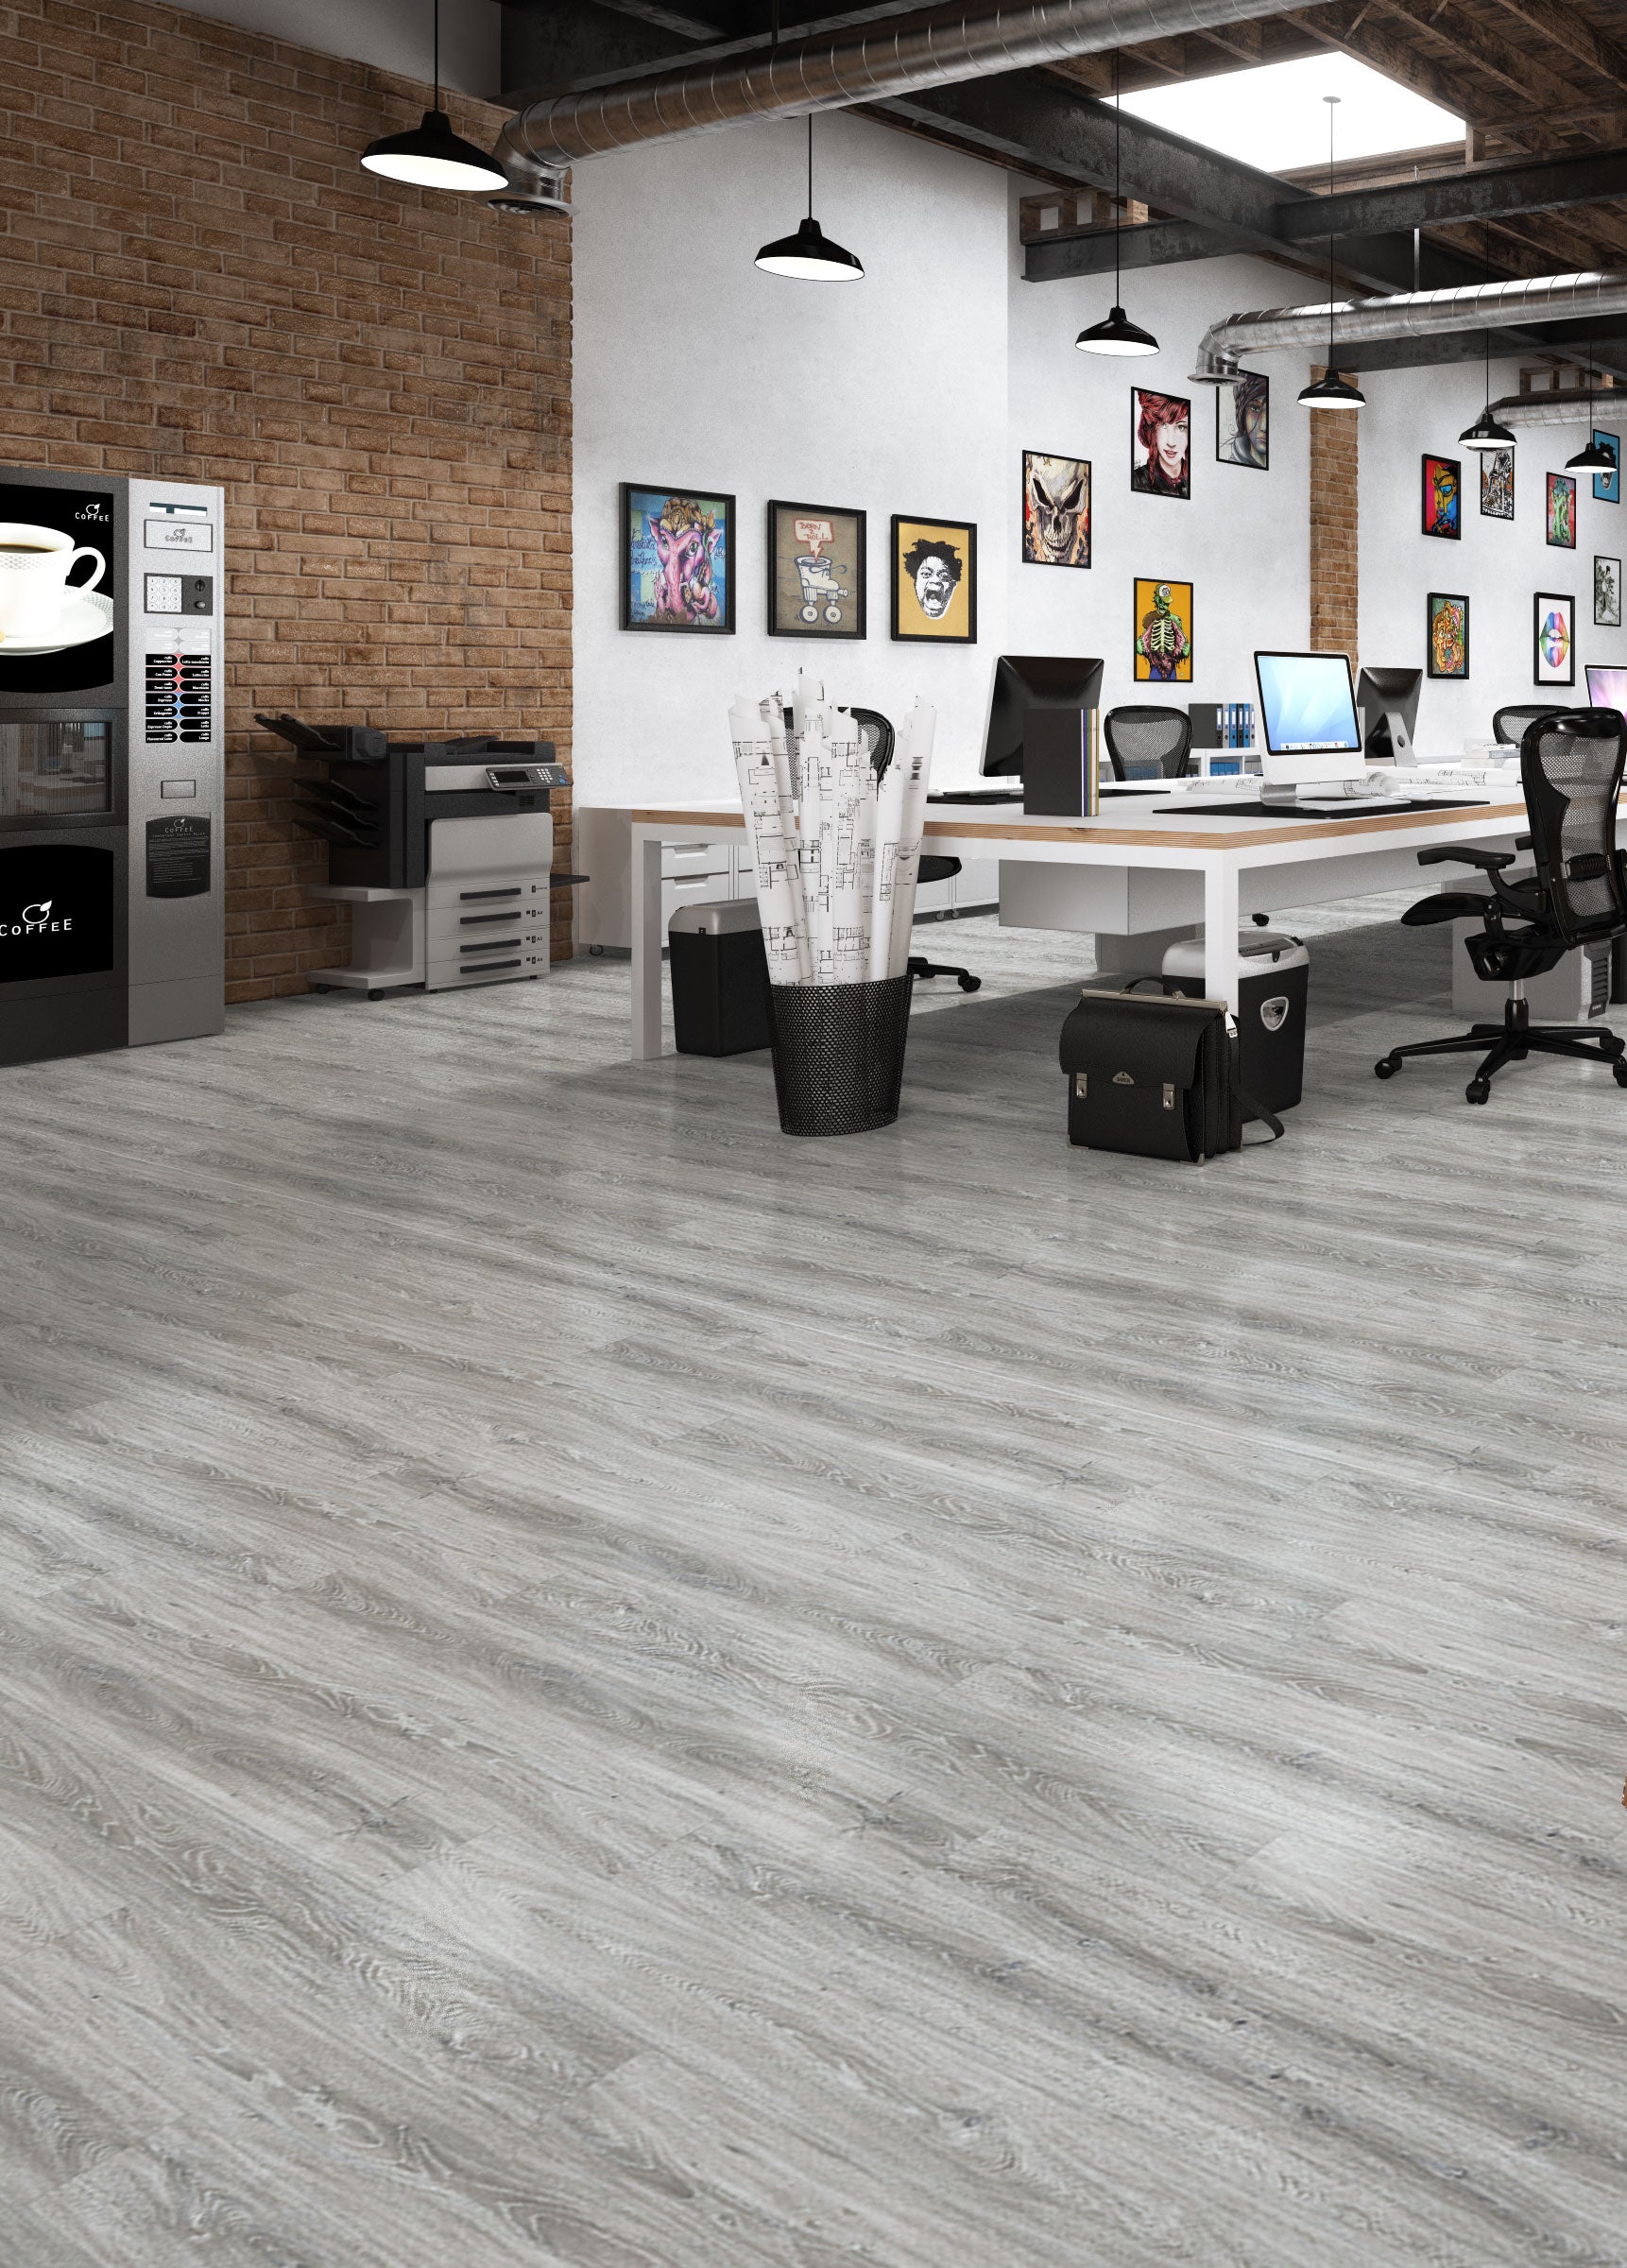 The Benefits of Vinyl Flooring for Your Workplace: From Affordability to Sustainability